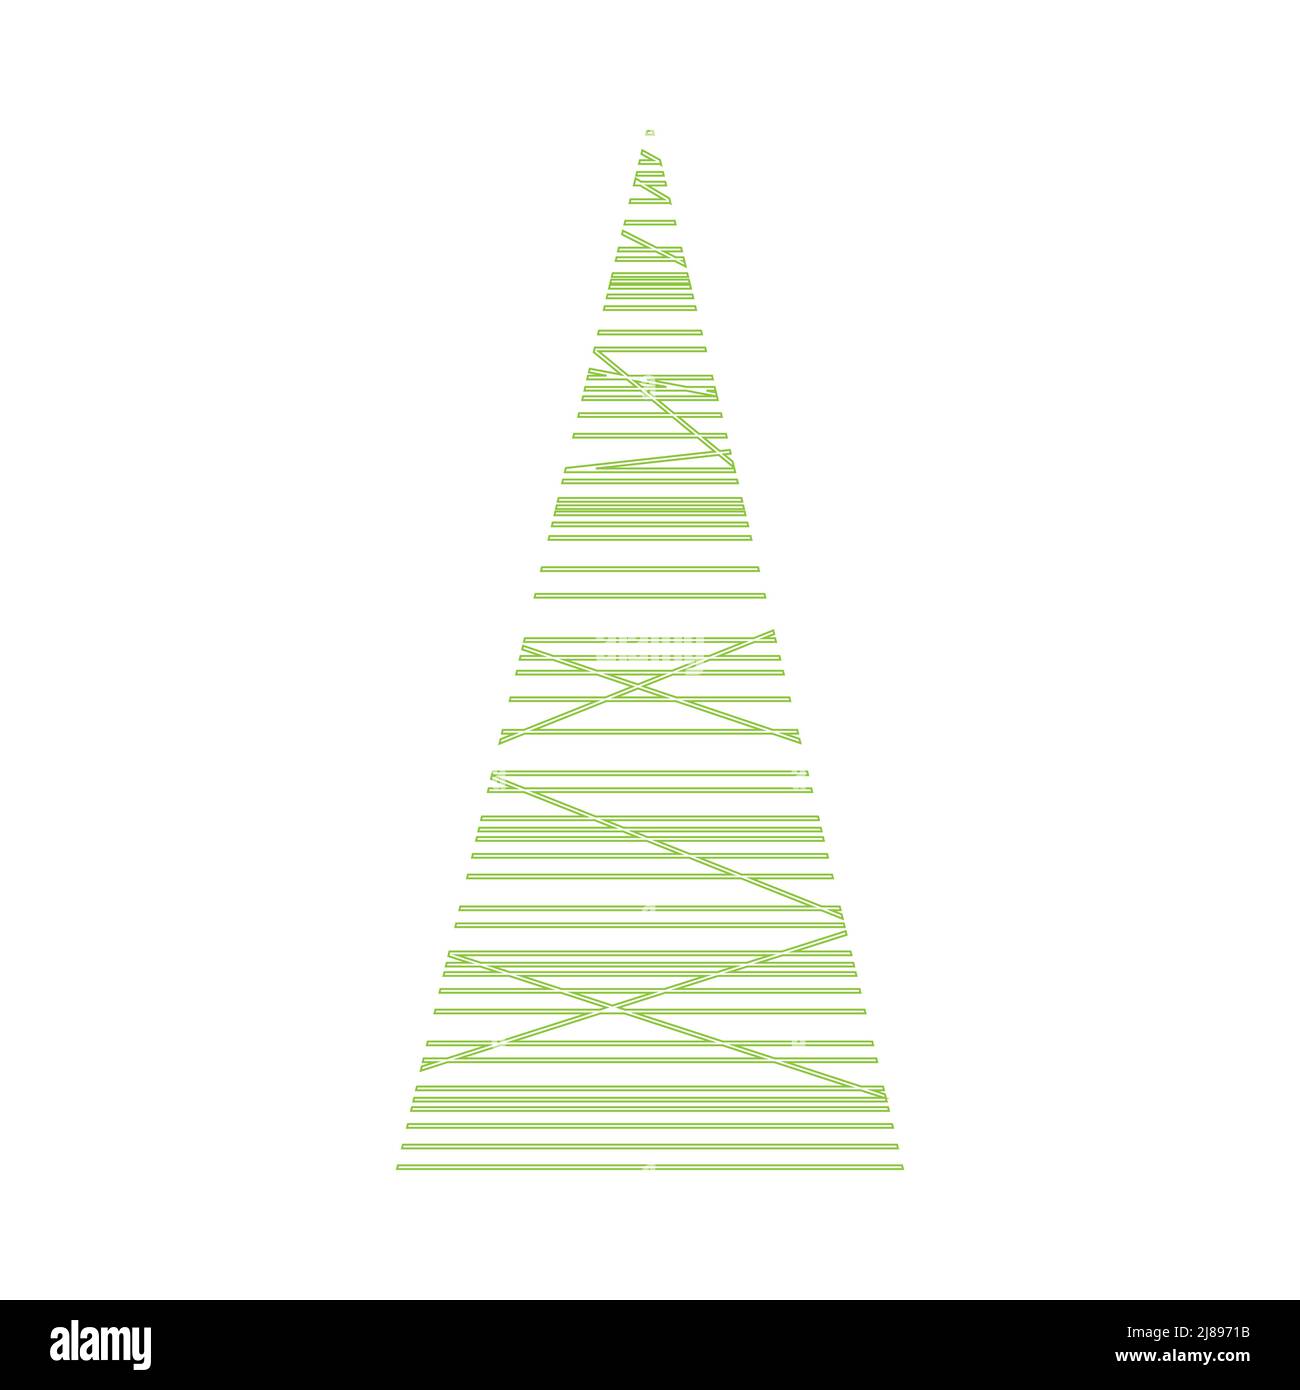 Single green abstract tree with conical crown. Spruce, fir, pine. Graphic design element for poster, emblem, sign. Schematic green branches. Minimalis Stock Vector